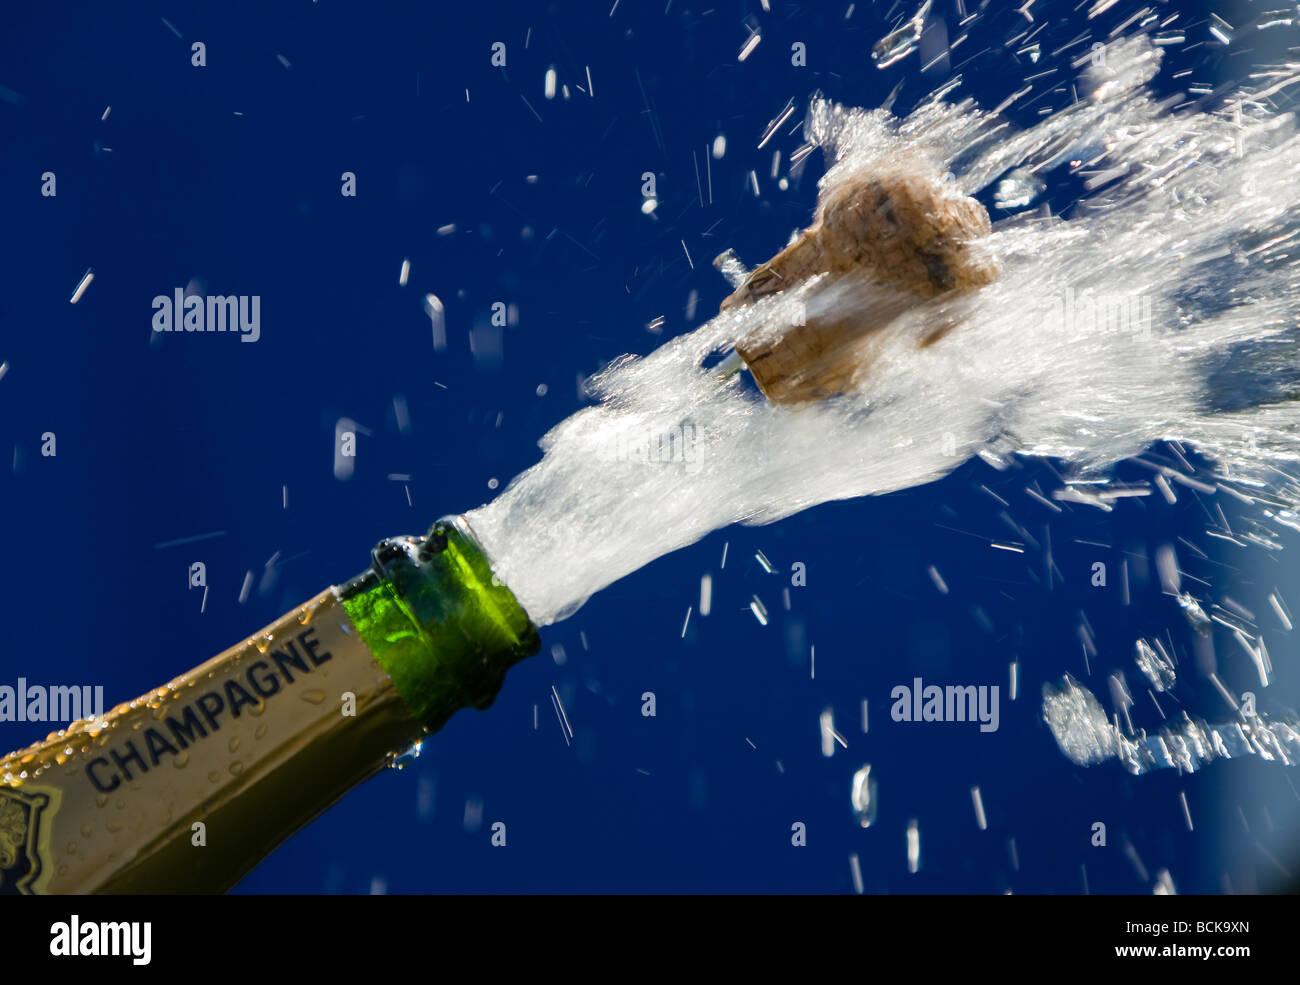 popping cork of an open champagne bottle Stock Photo